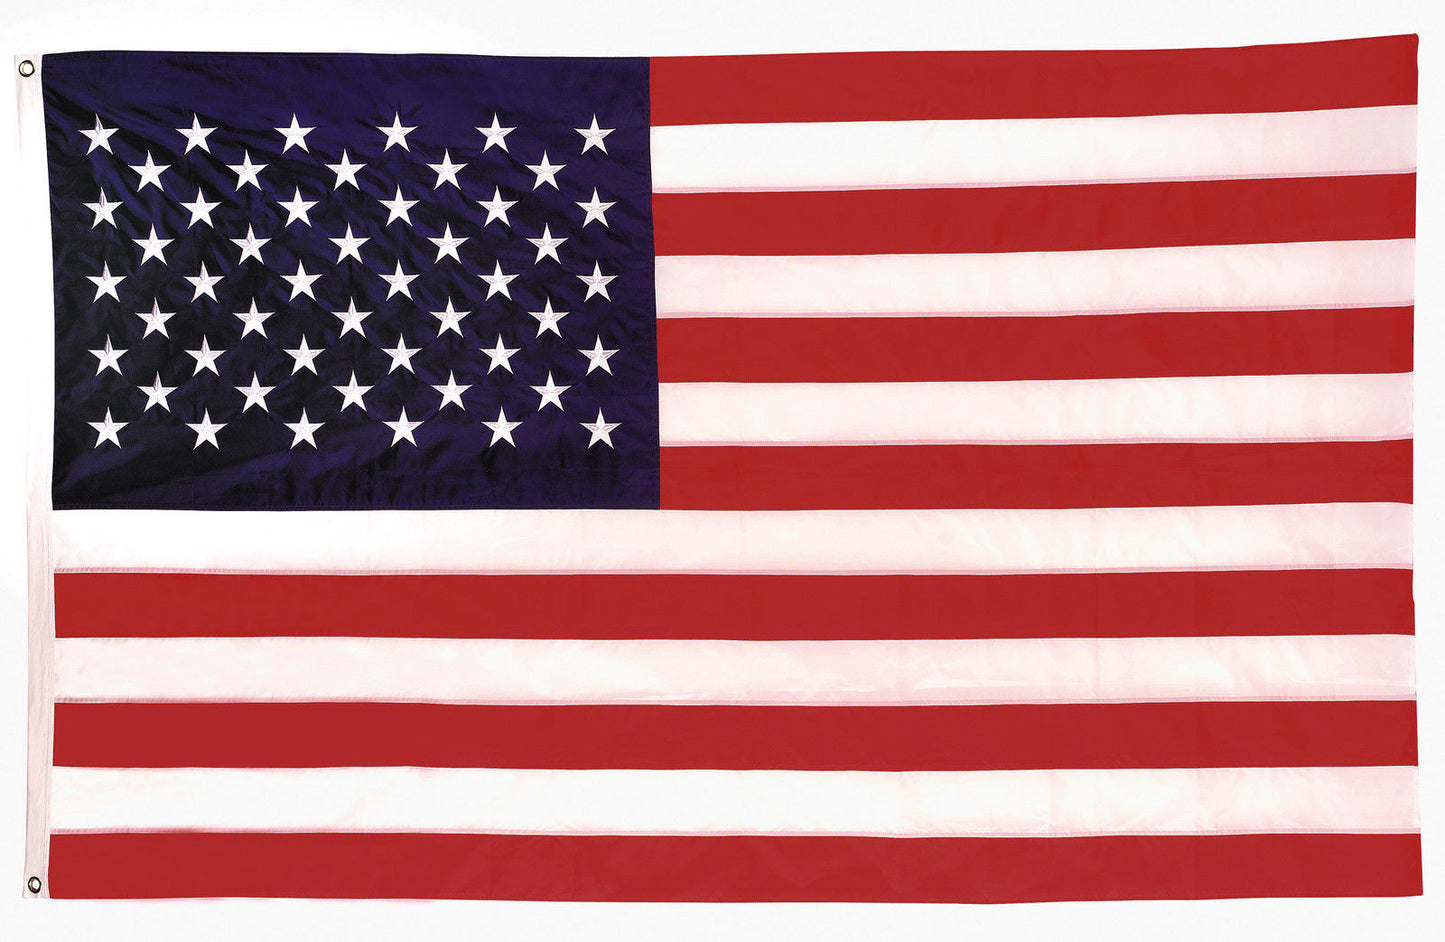 Deluxe Oversize United States Flag with Embroidered Stars 5 ft x 8 ft - US Flag